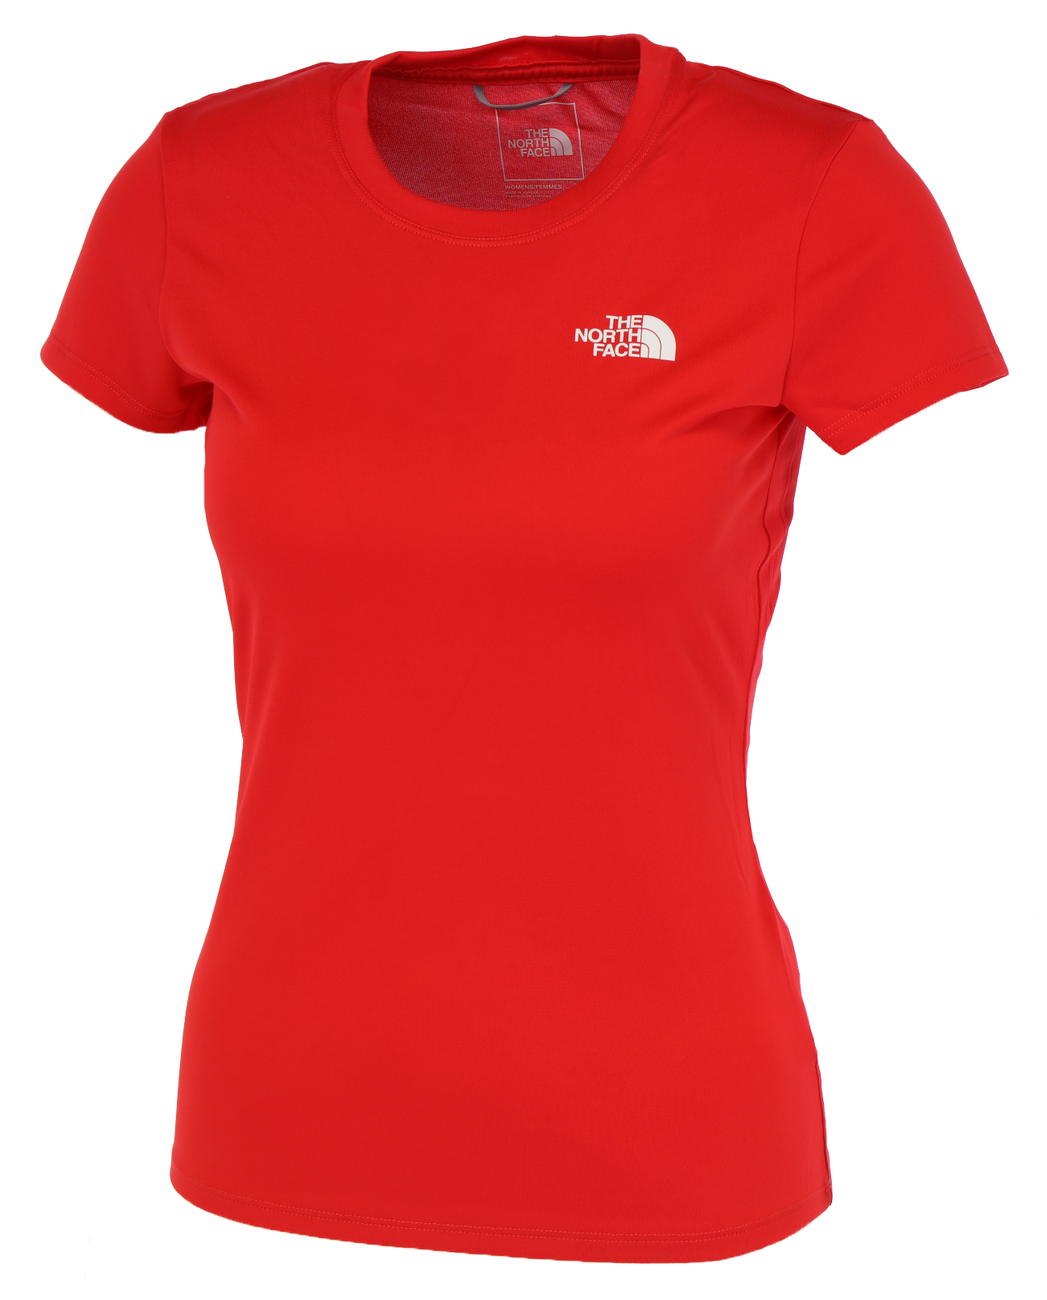 THE NORTH FACE W REAXION AMP CREW Damen T-Shirt